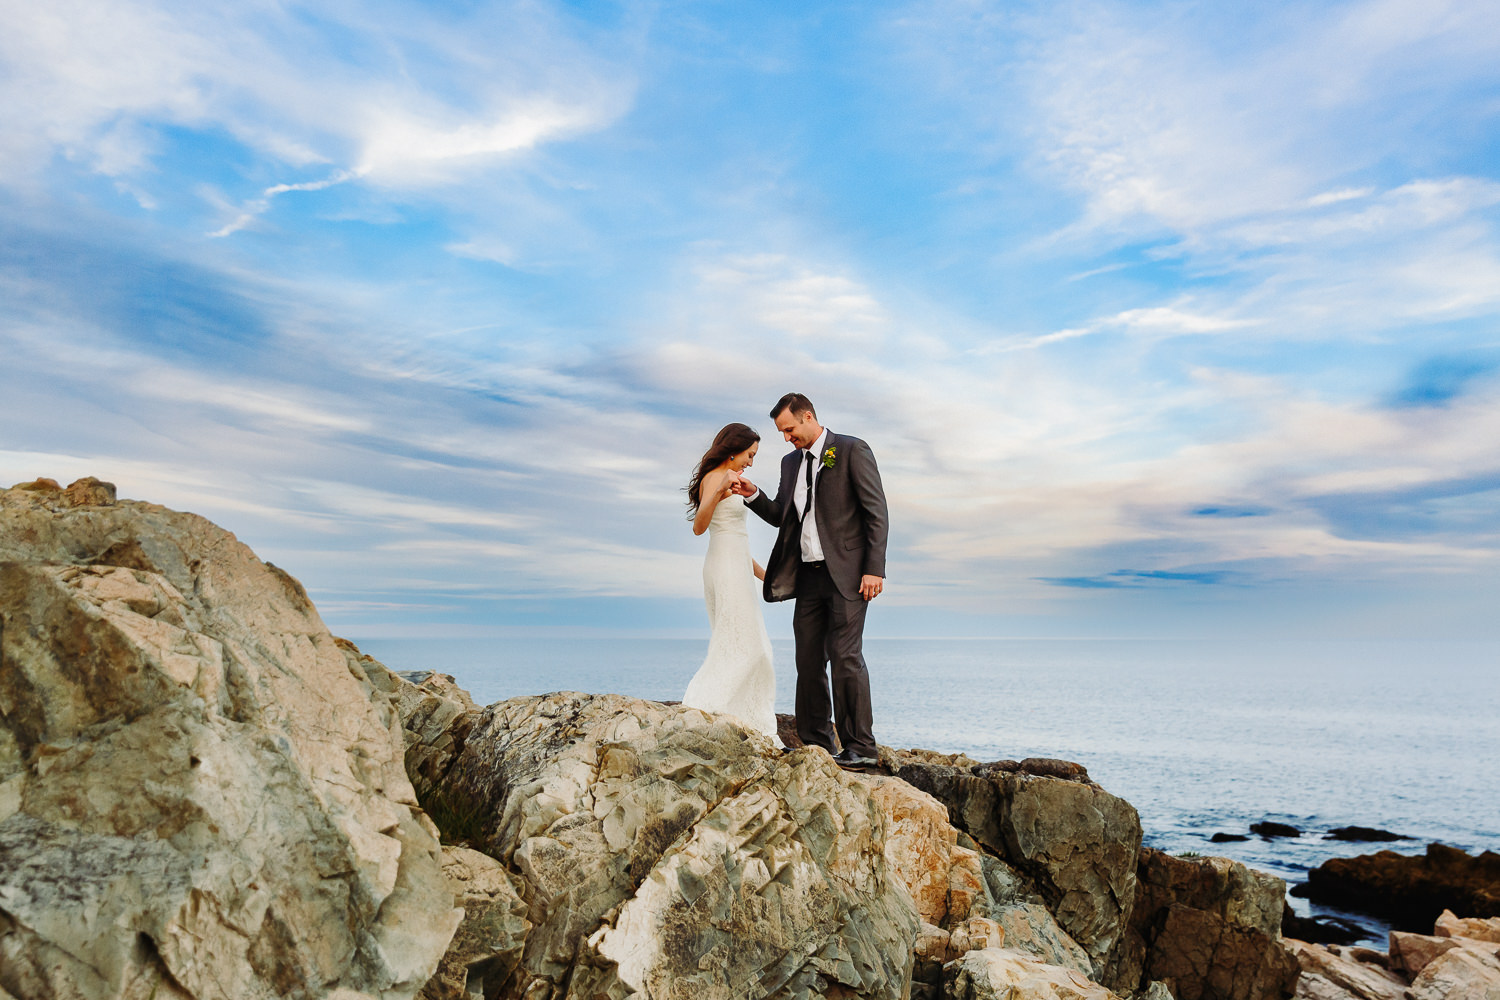 Bride and groom dance on cliffs at Otter Point in Acadia National Park.